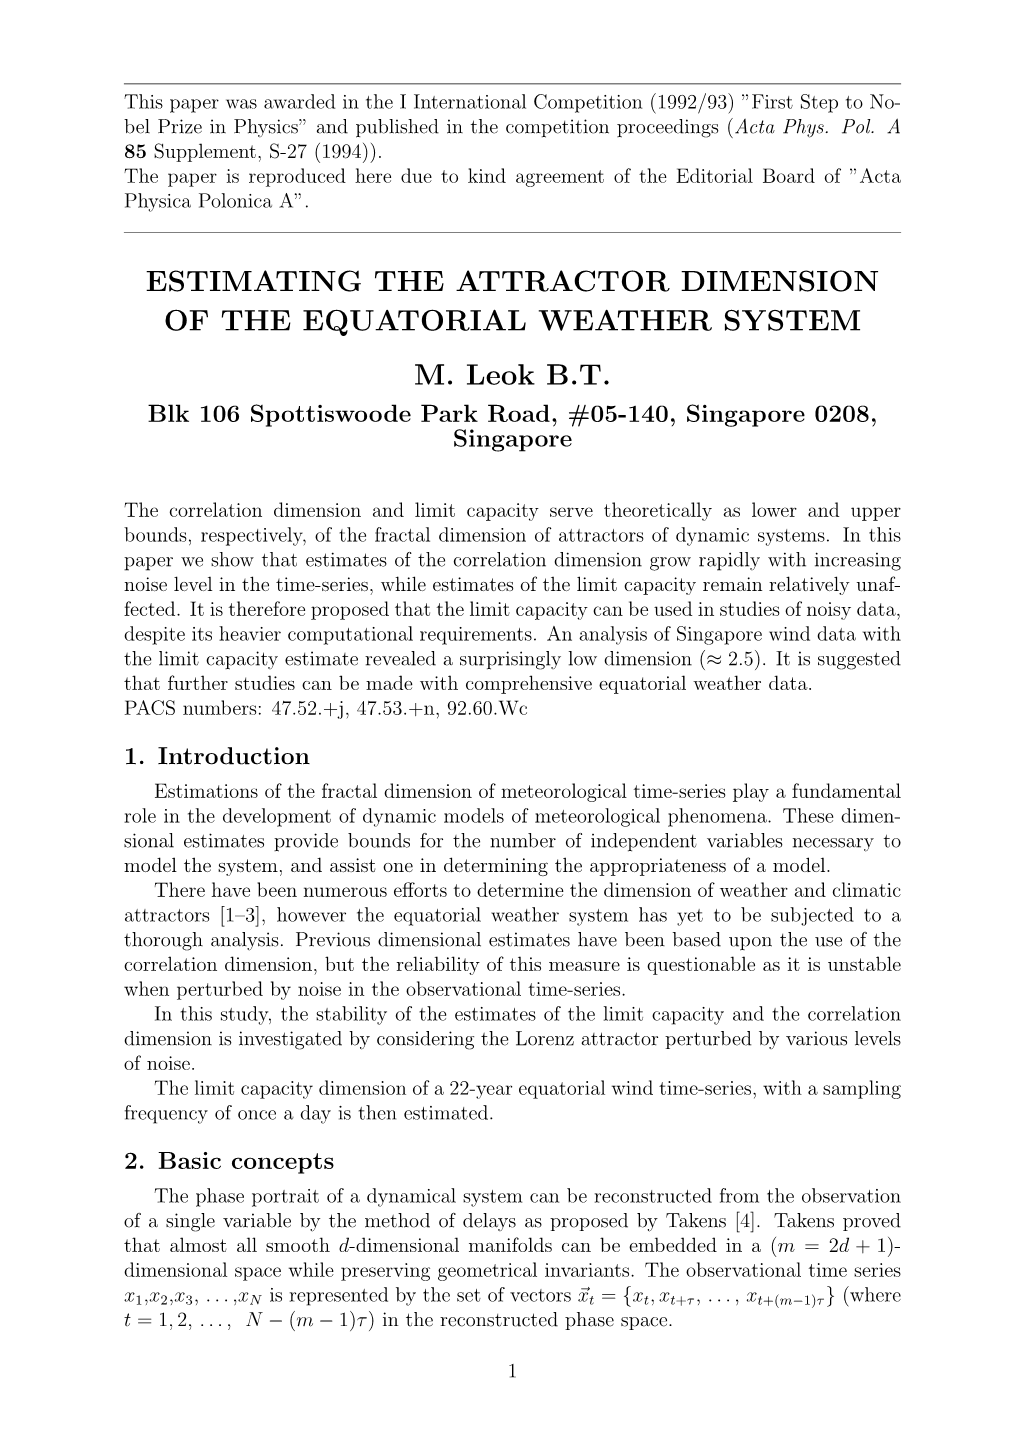 Estimating the Attractor Dimension of the Equatorial Weather System M